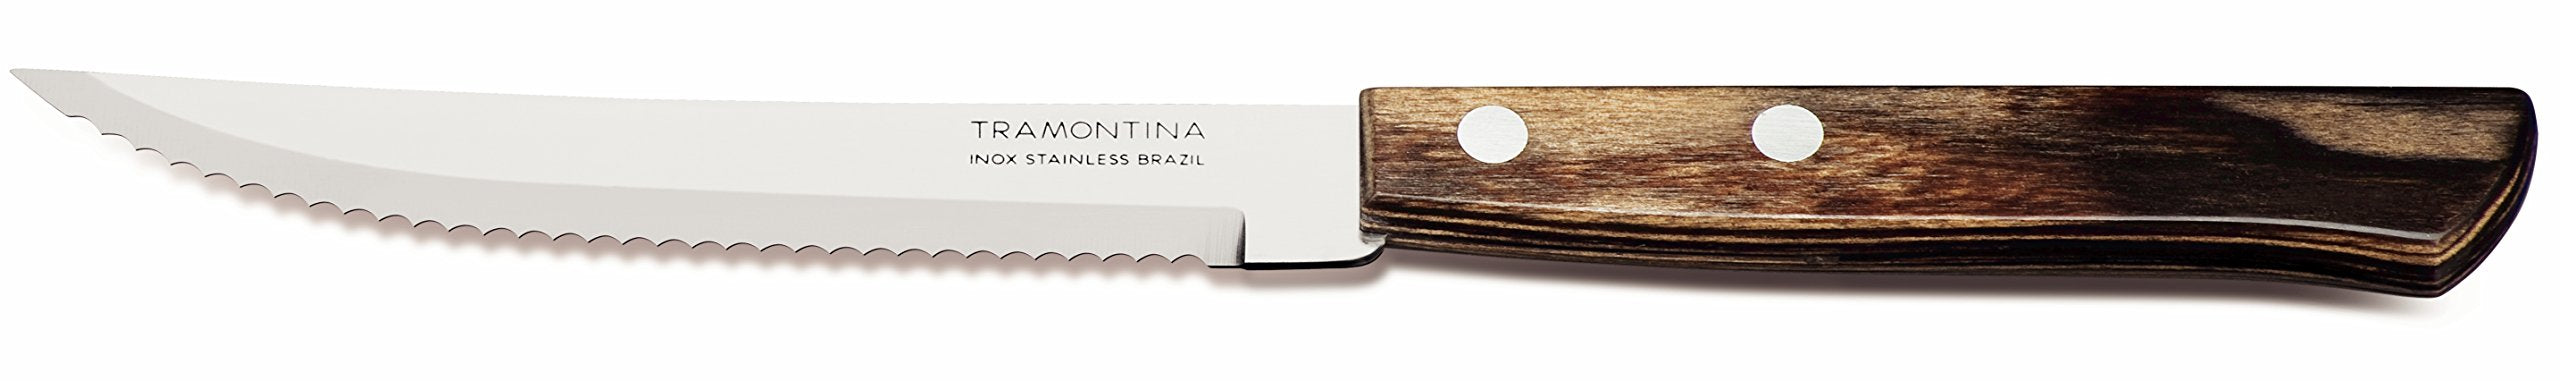 Tramontina Knives Set, Stainless Steel, Red, 30 x 30 x 30 cm — CHIMIYA